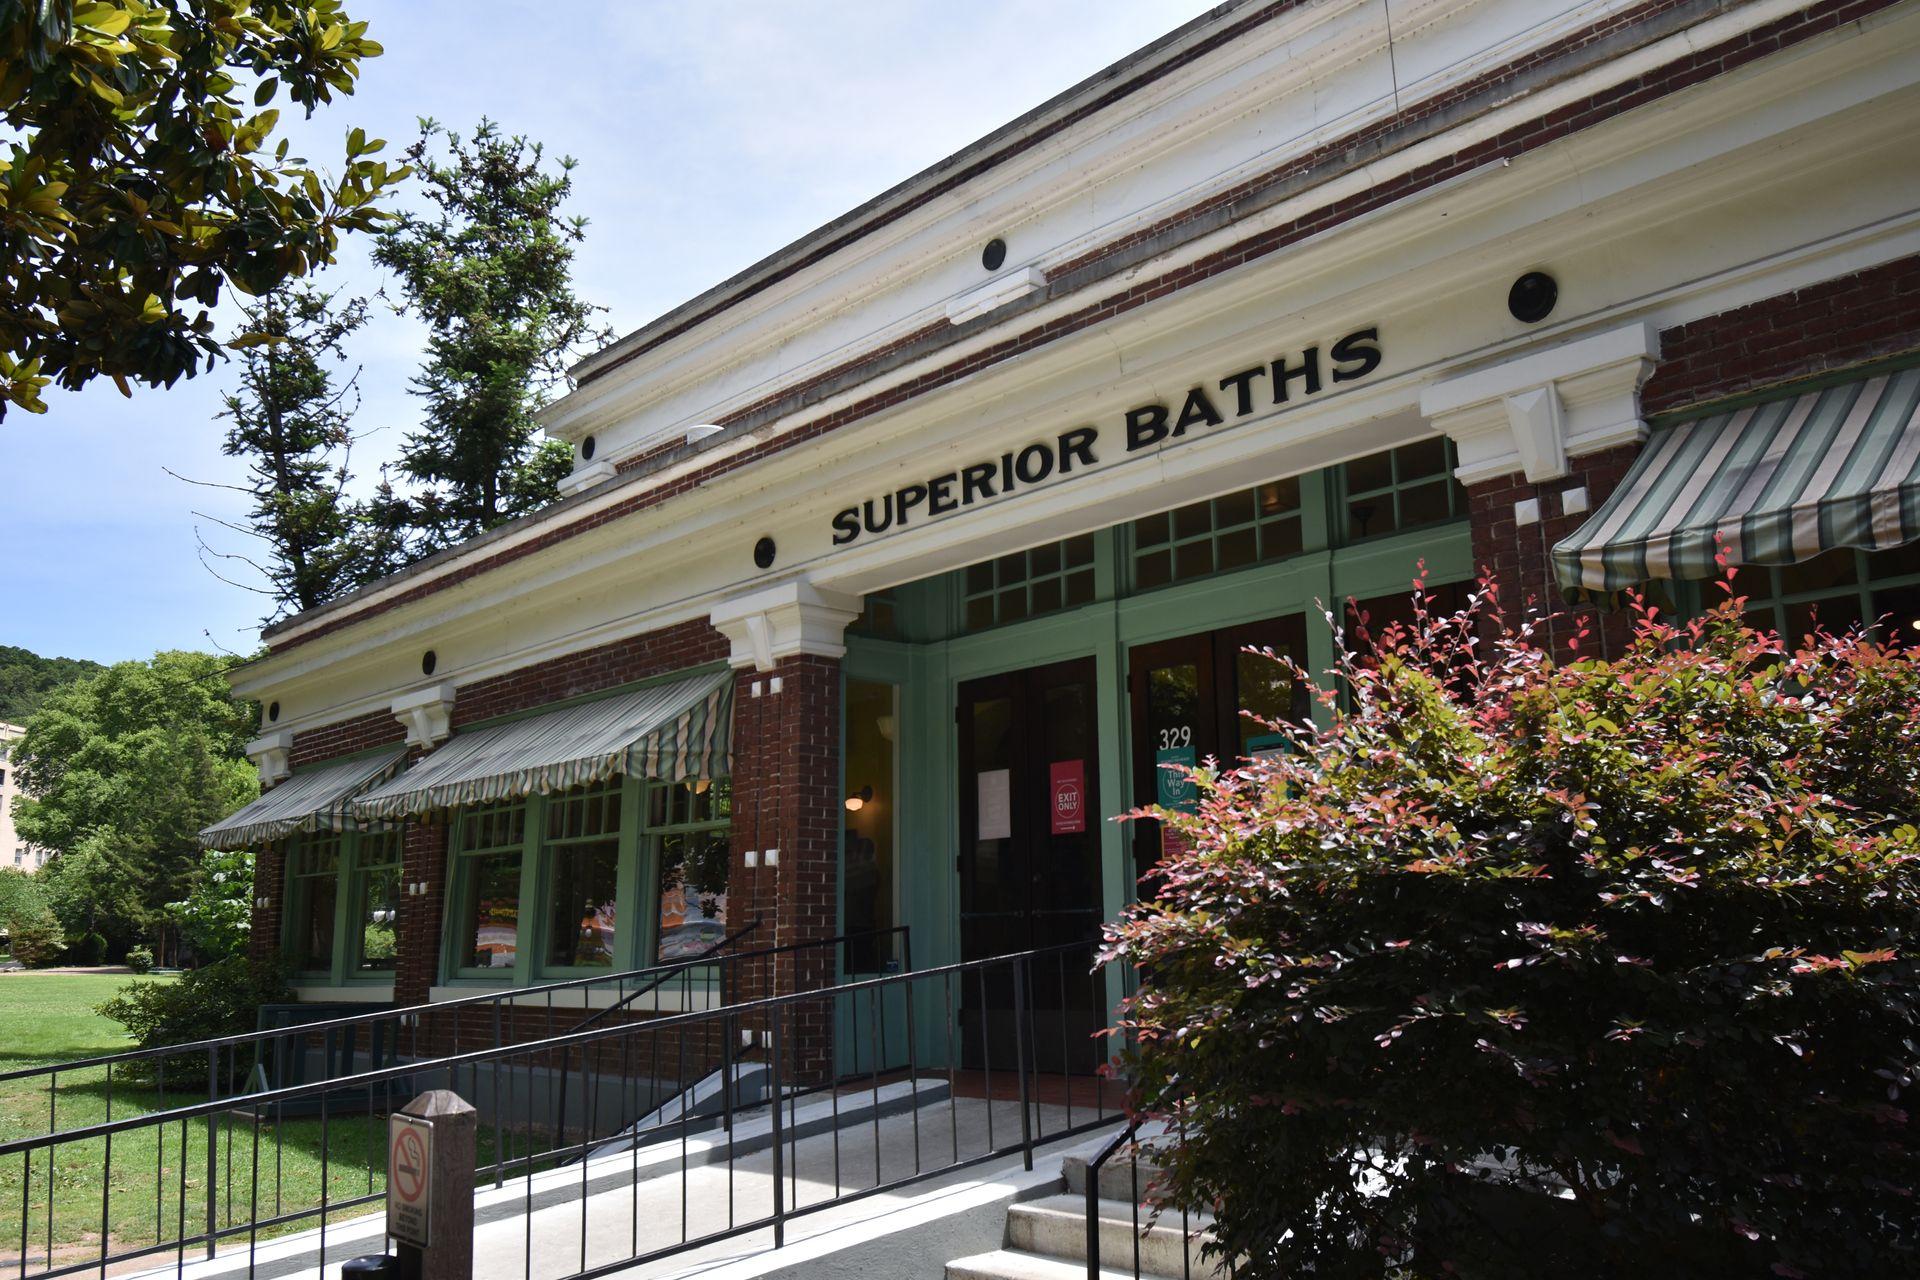 The exterior of Superior Bathhouse Brewery. The building has brown brick and green awnings.